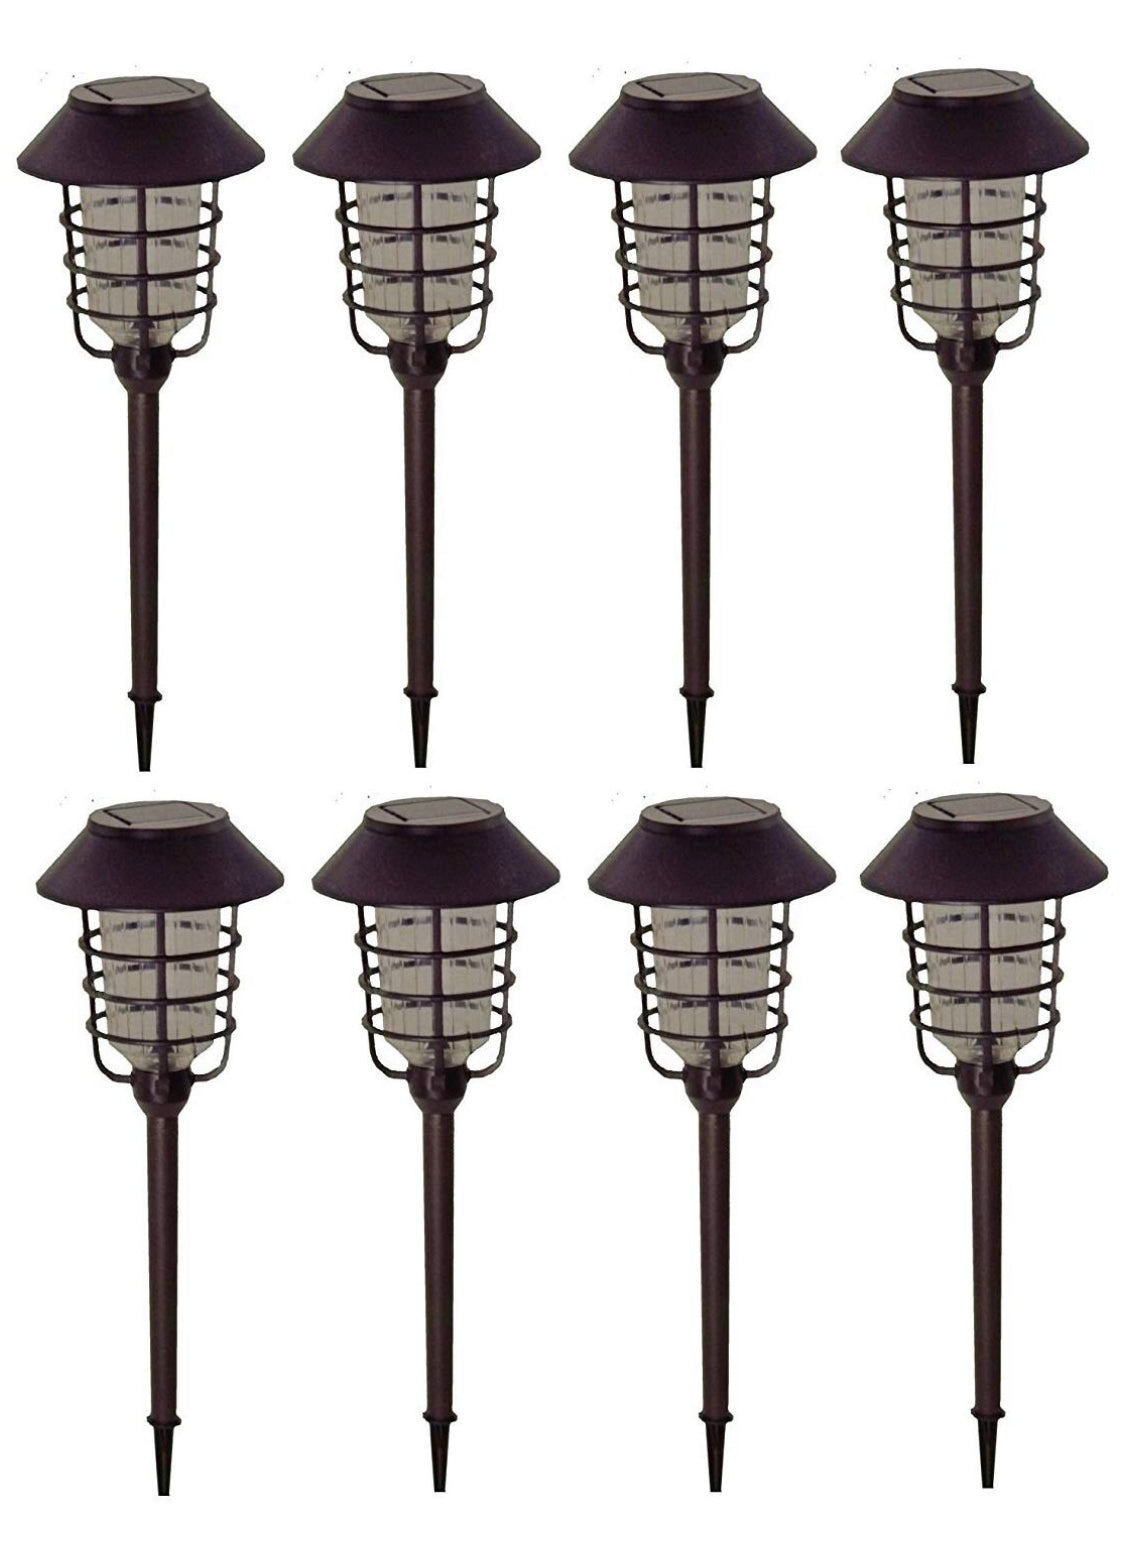 Energizer [Smartyard] LED 8 Piece Large Solar Pathway Lights Aluminum with glass-10 LM